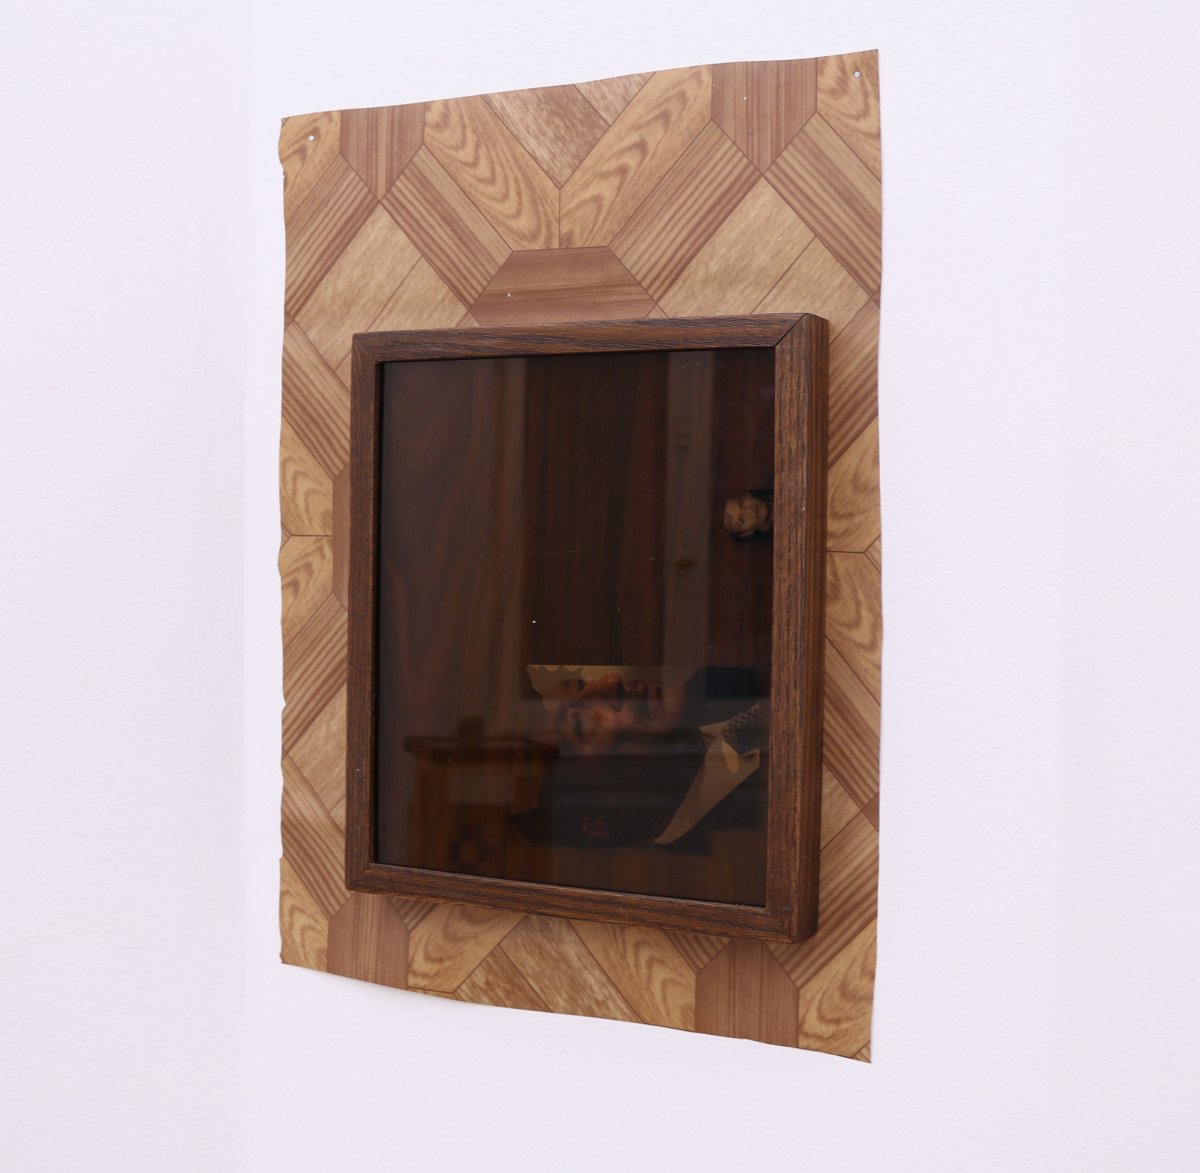  Untitled (clue), 2016, variable dimensions, PVC flooring on wall, wood frame (25 x 30 cm) with tinted glass and found photographs of uncle and Sadat, faux wood laminate backing. 